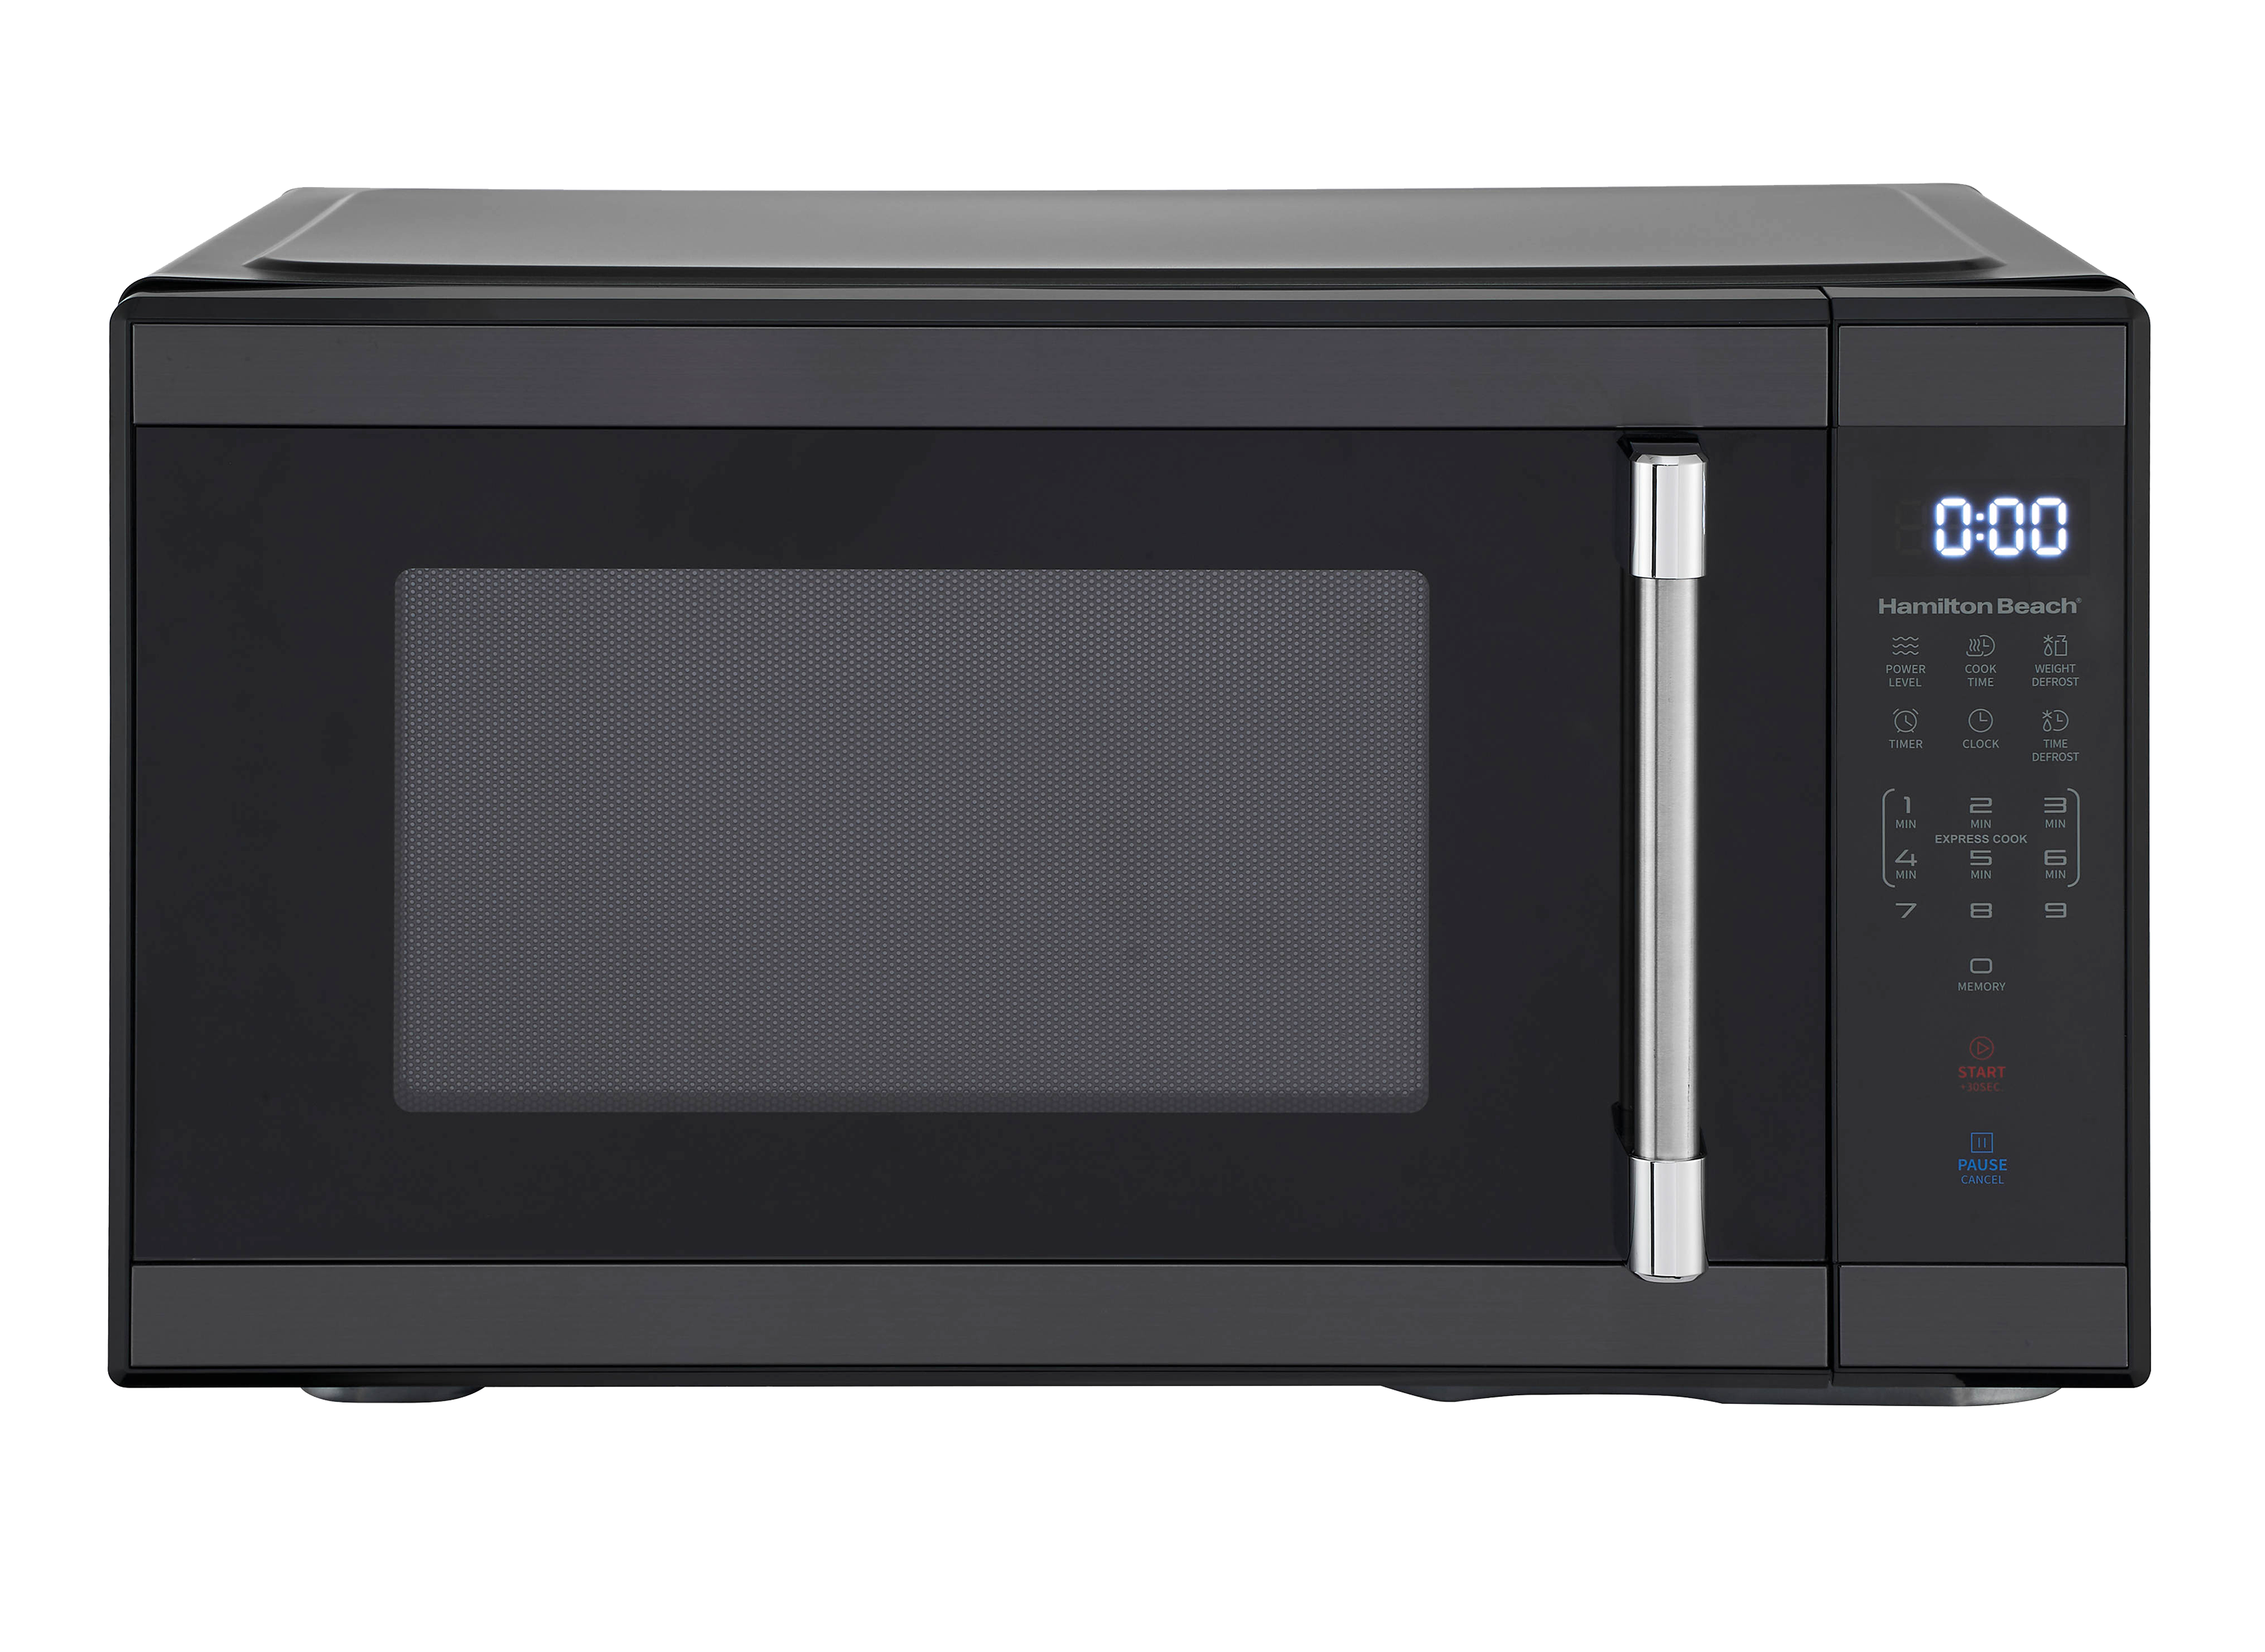 Hamilton Beach HB61S100027880 Microwave Oven Review - Consumer Reports